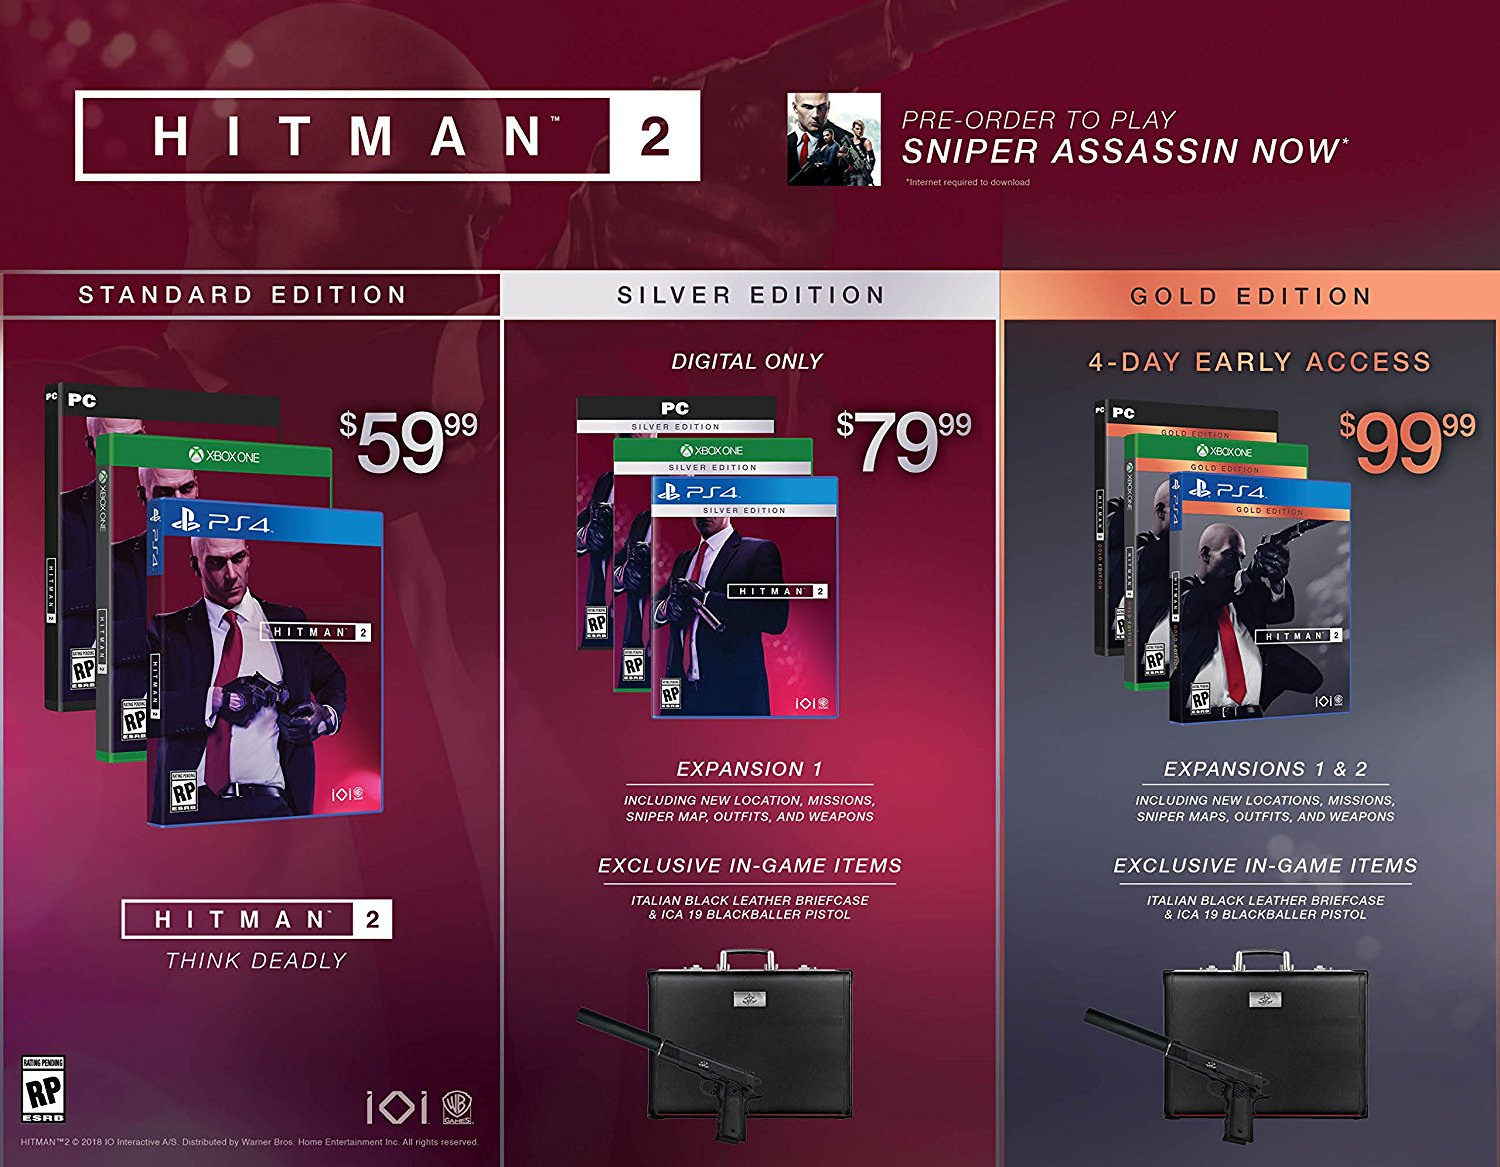 ejer flod Forfærde Wario64 on Twitter: "Hitman 2 Collector's Edition (PS4/XBO) is up for  preorder at GameStop (exclusive) https://t.co/kxXvP1skvE  https://t.co/TfYXQGoVYK" / Twitter